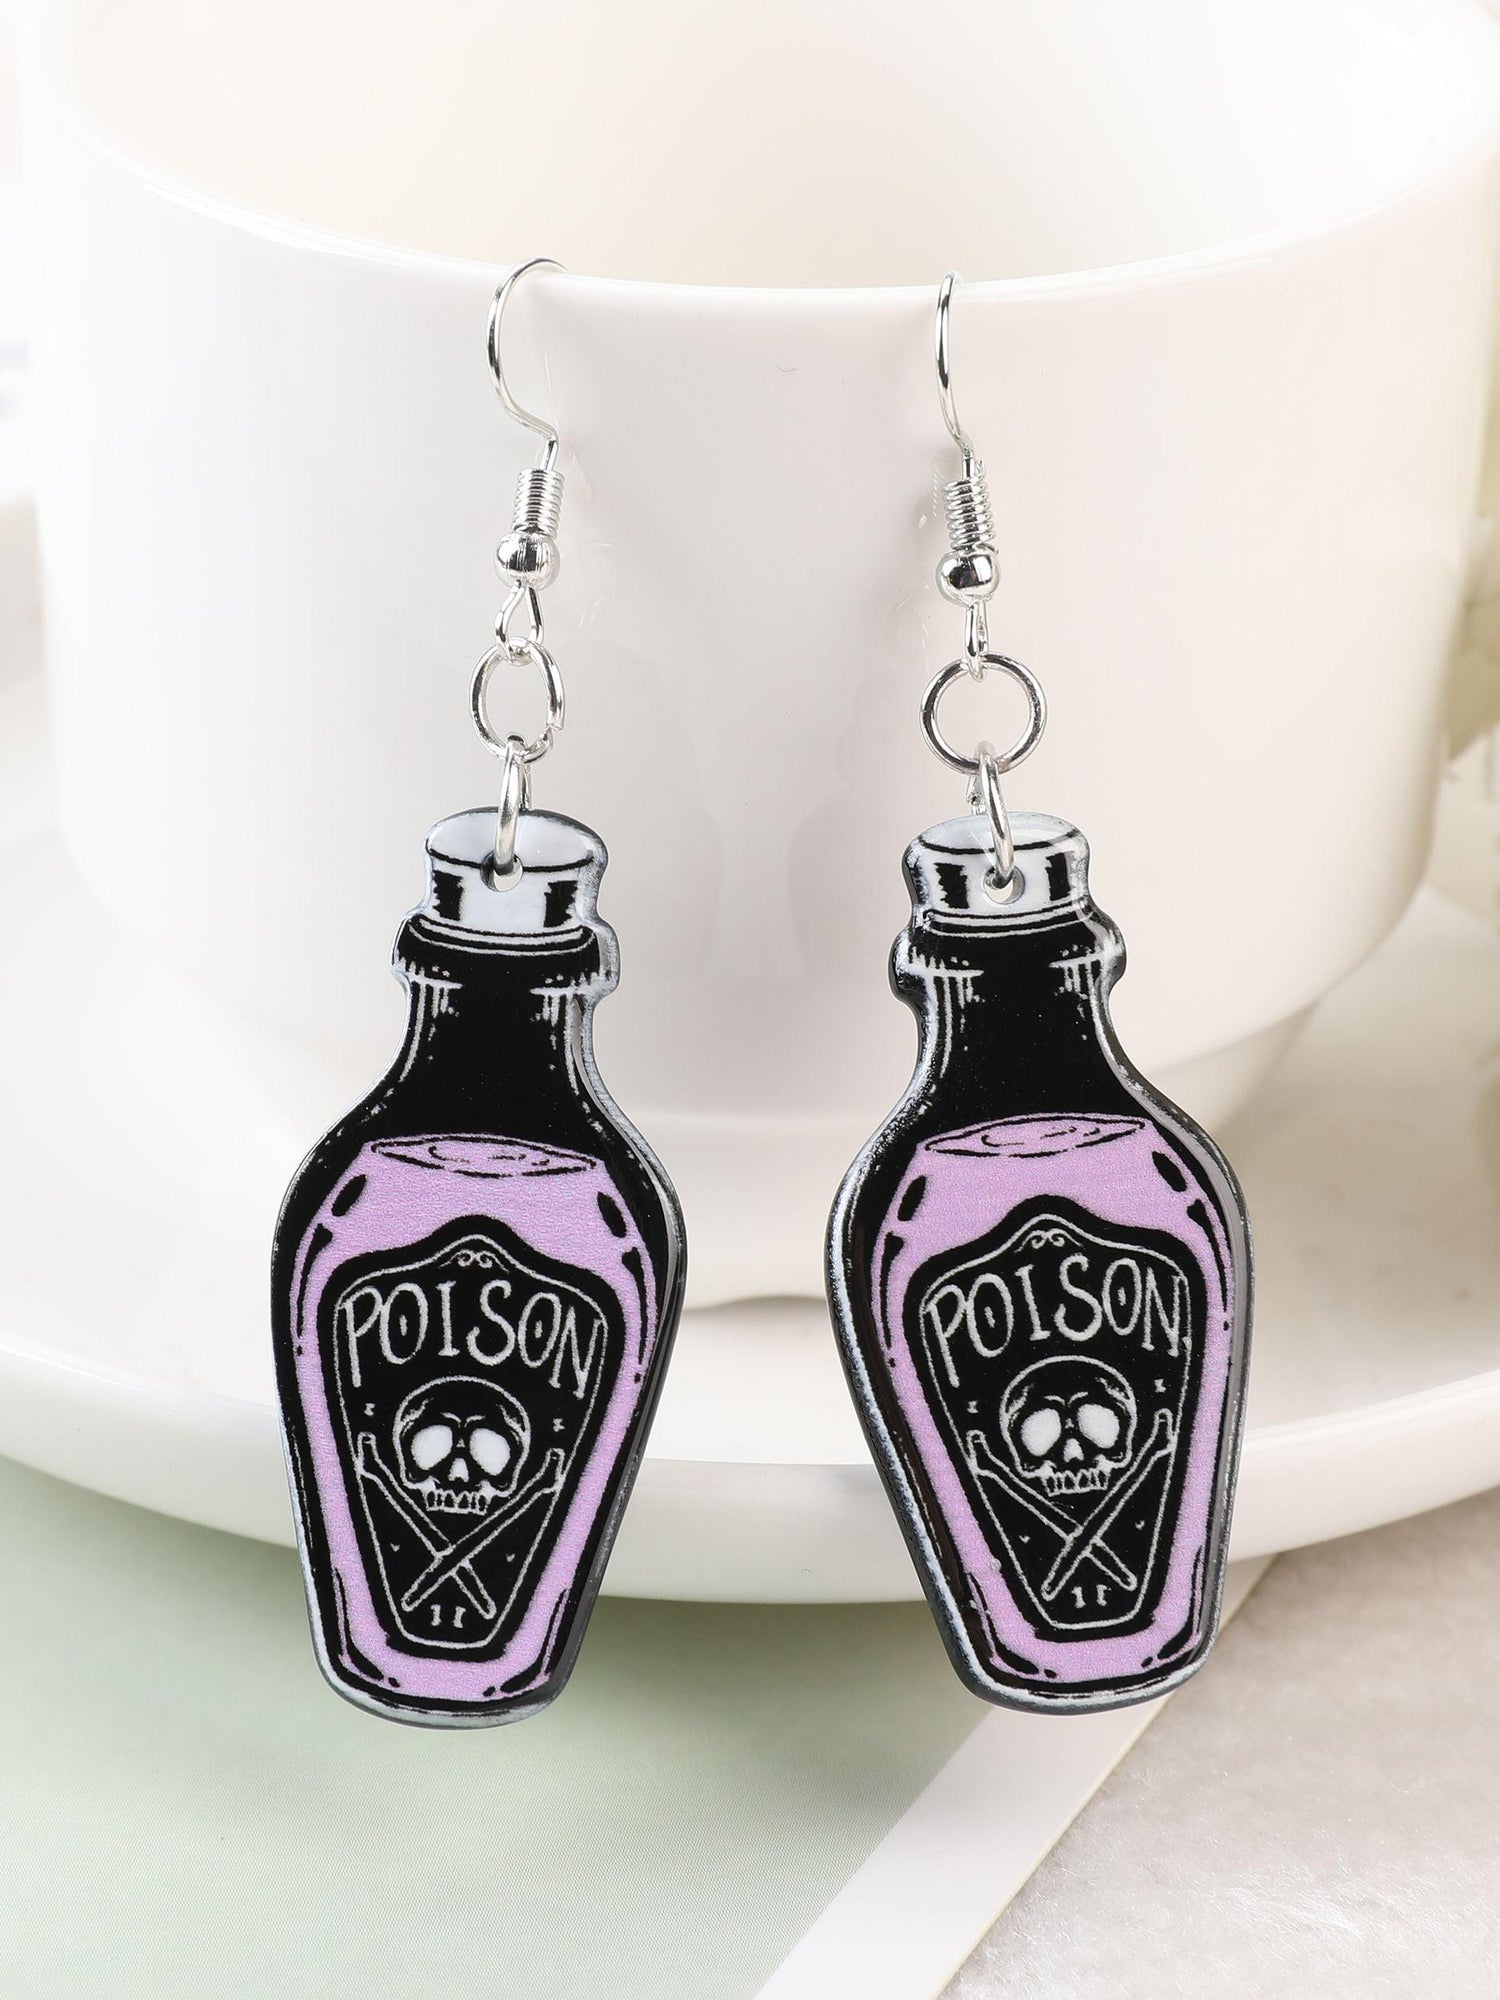 Drink this! Poison Bottle Earrings - JOURNEY artisan soaps & candles